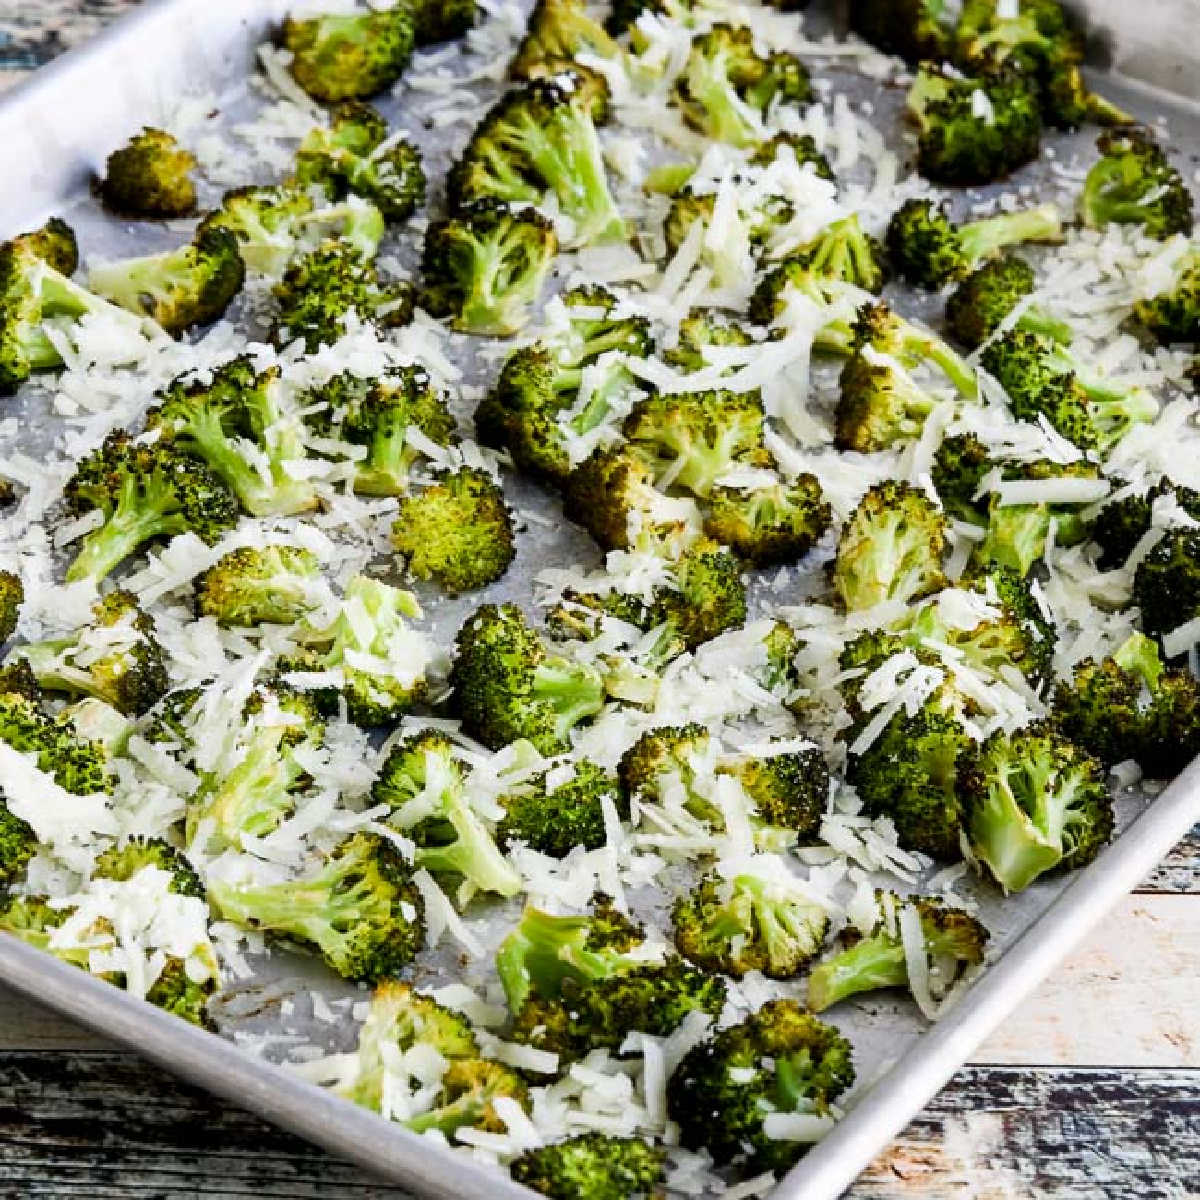 square image of Roasted Broccoli with Lemon and Pecorino-Romano Cheese shown on baking sheet